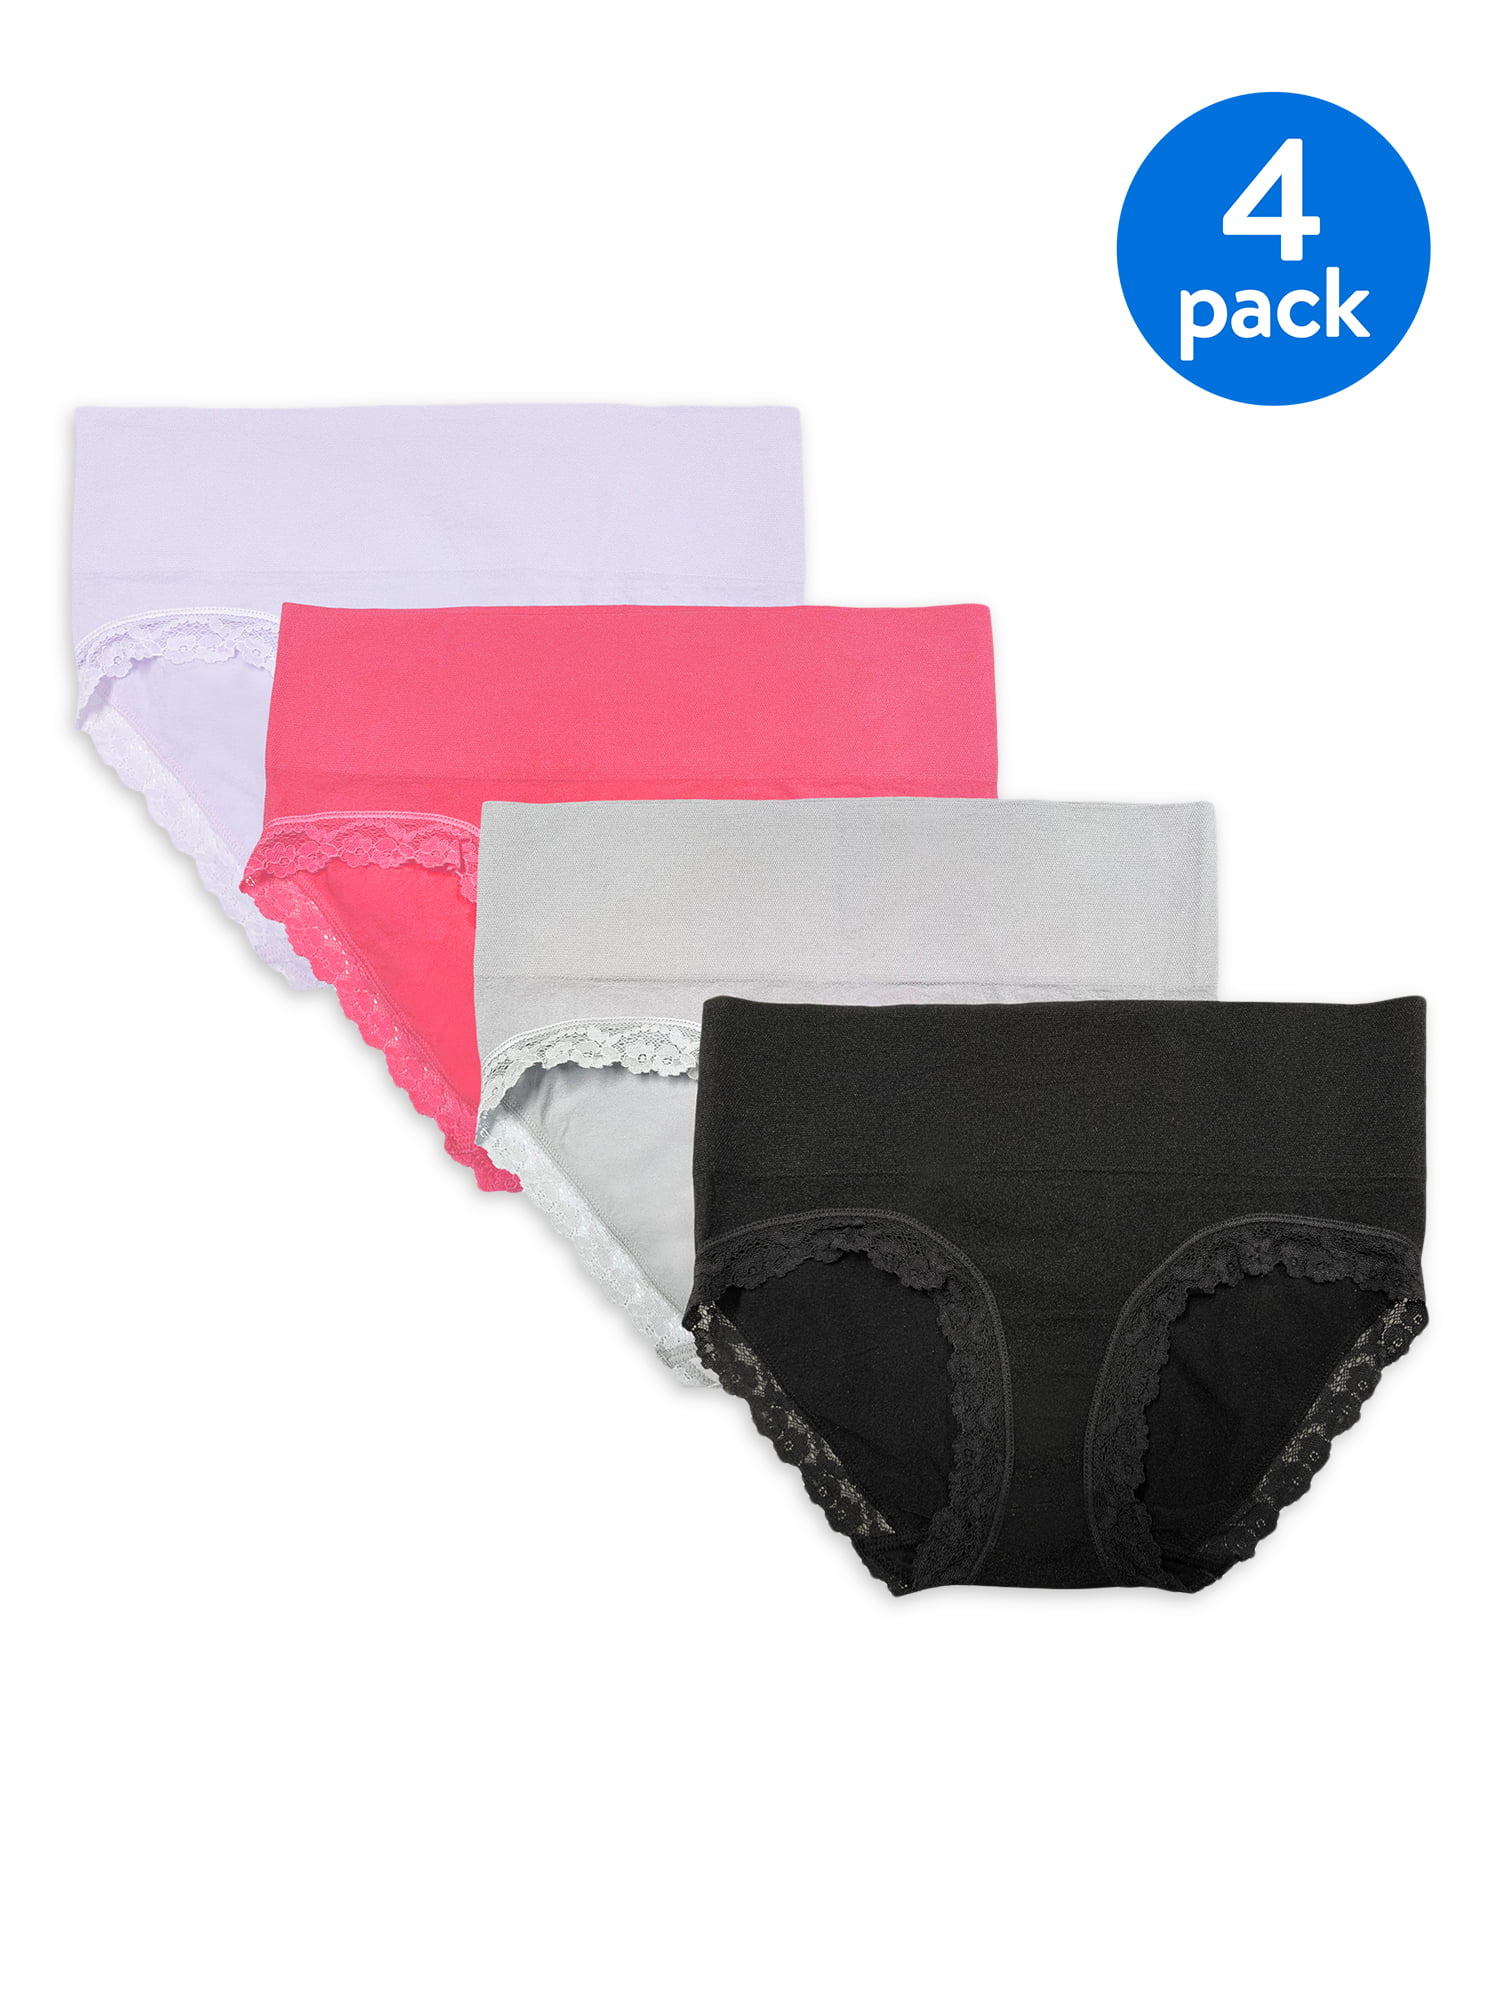 Men Hipster Panties High Cut Hip G6912 Low Rise Soft Silky Smooth Stretchy Underwear  Nylon Spandex From Qianniaodao, $5.89